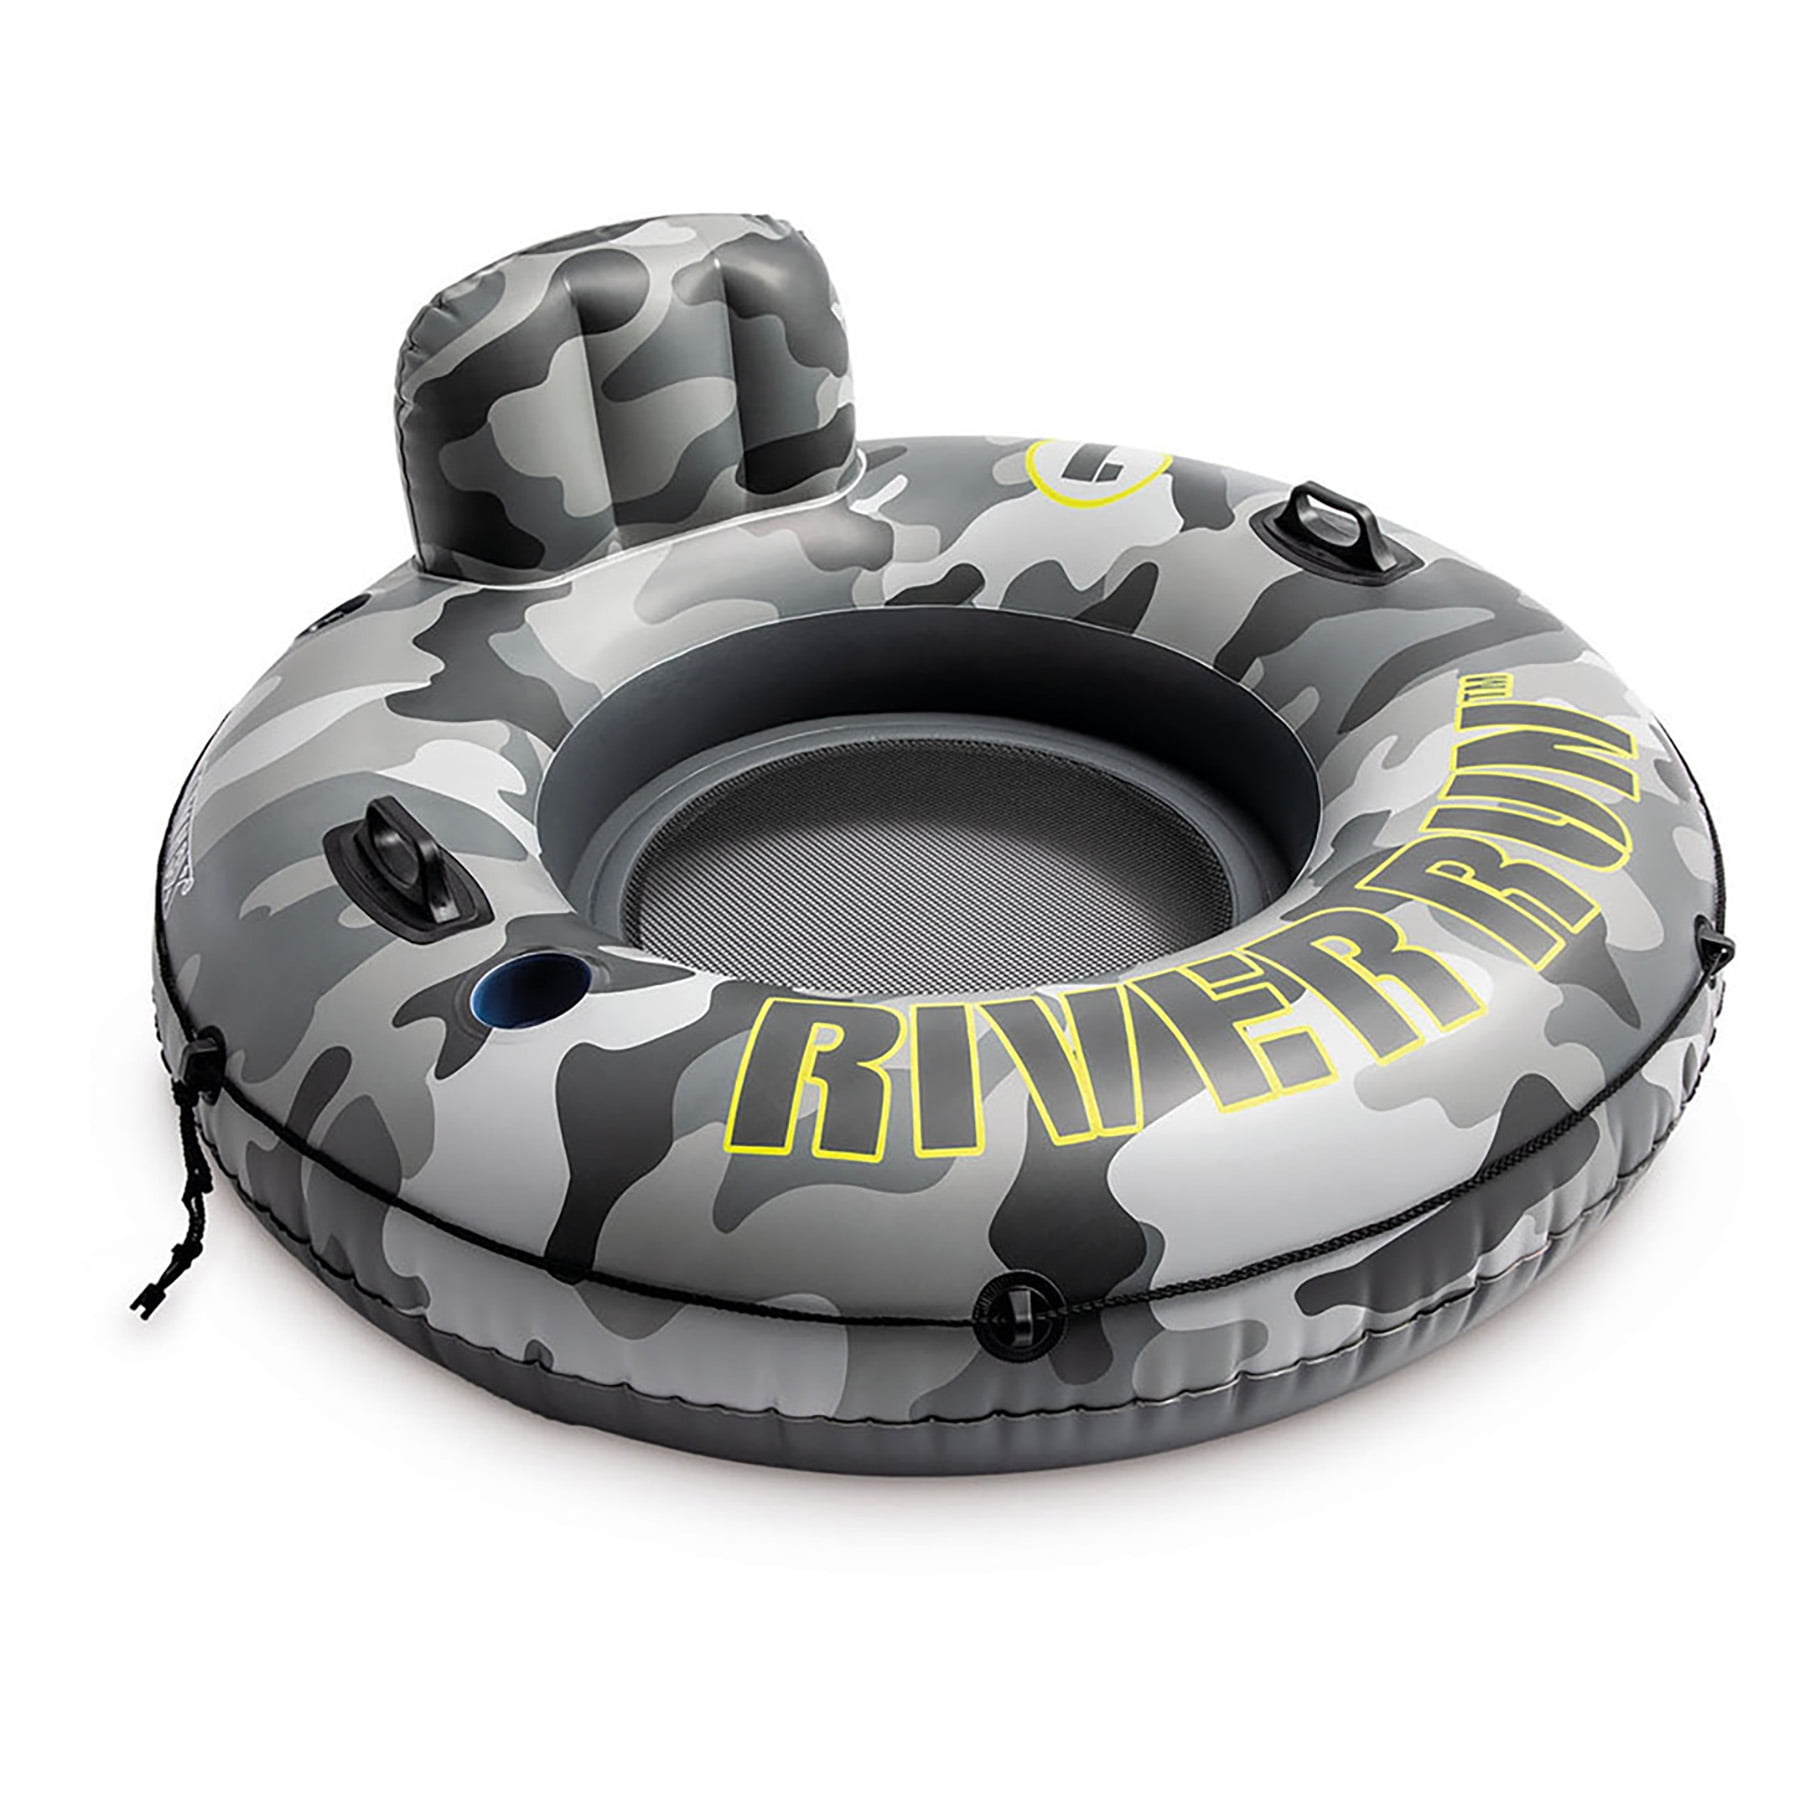 Intex River Run I Sport Lounge, Inflatable Water Float, 53